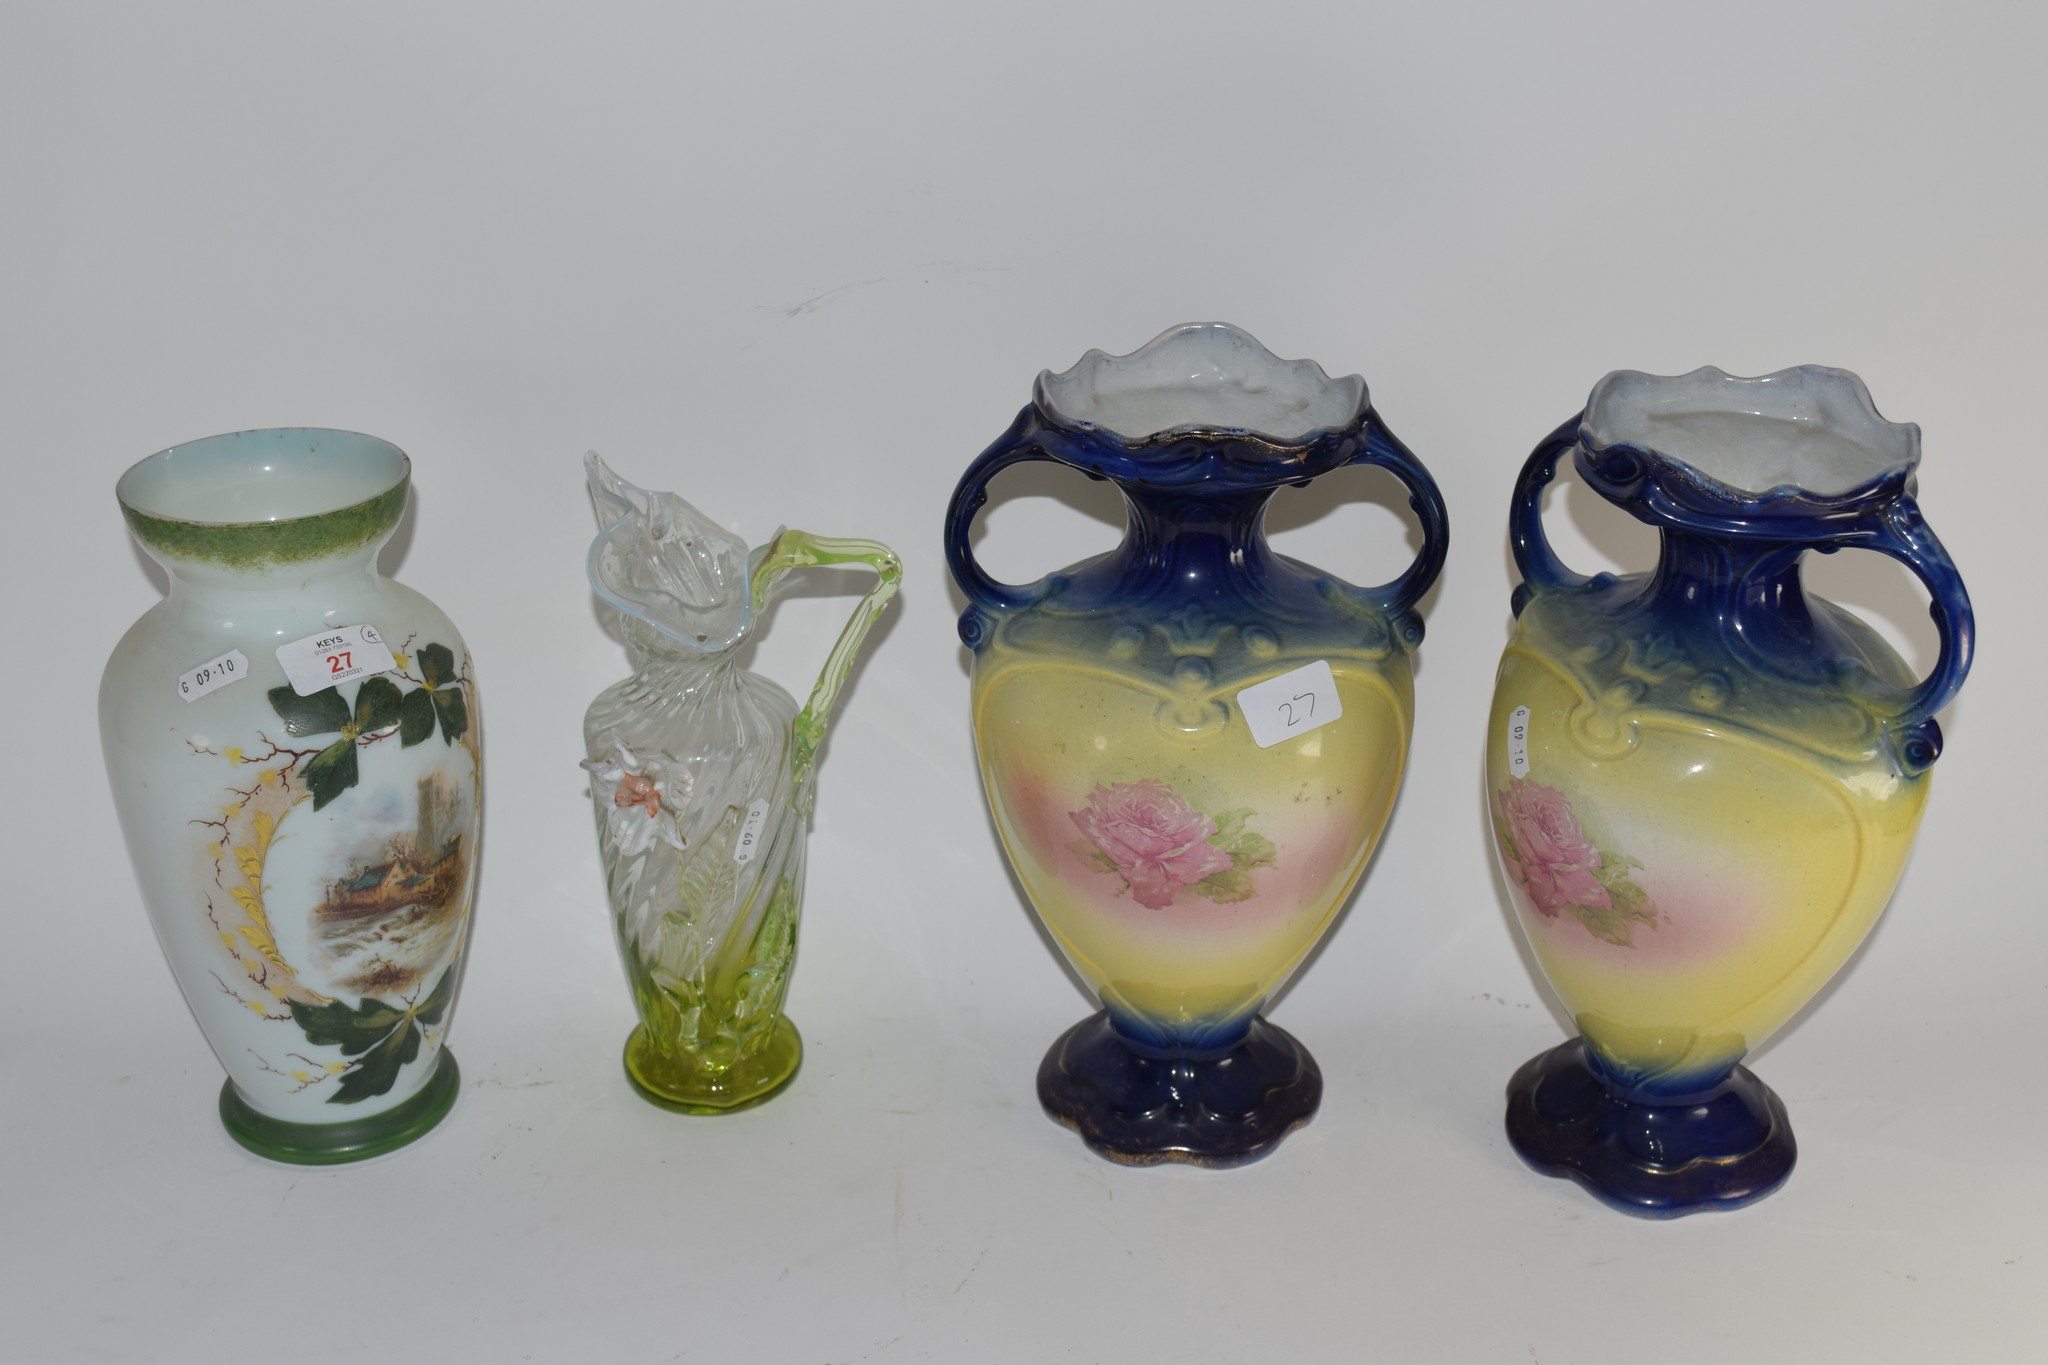 PAIR OF VASES AND GLASS VASE WITH PAINTED DECORATION